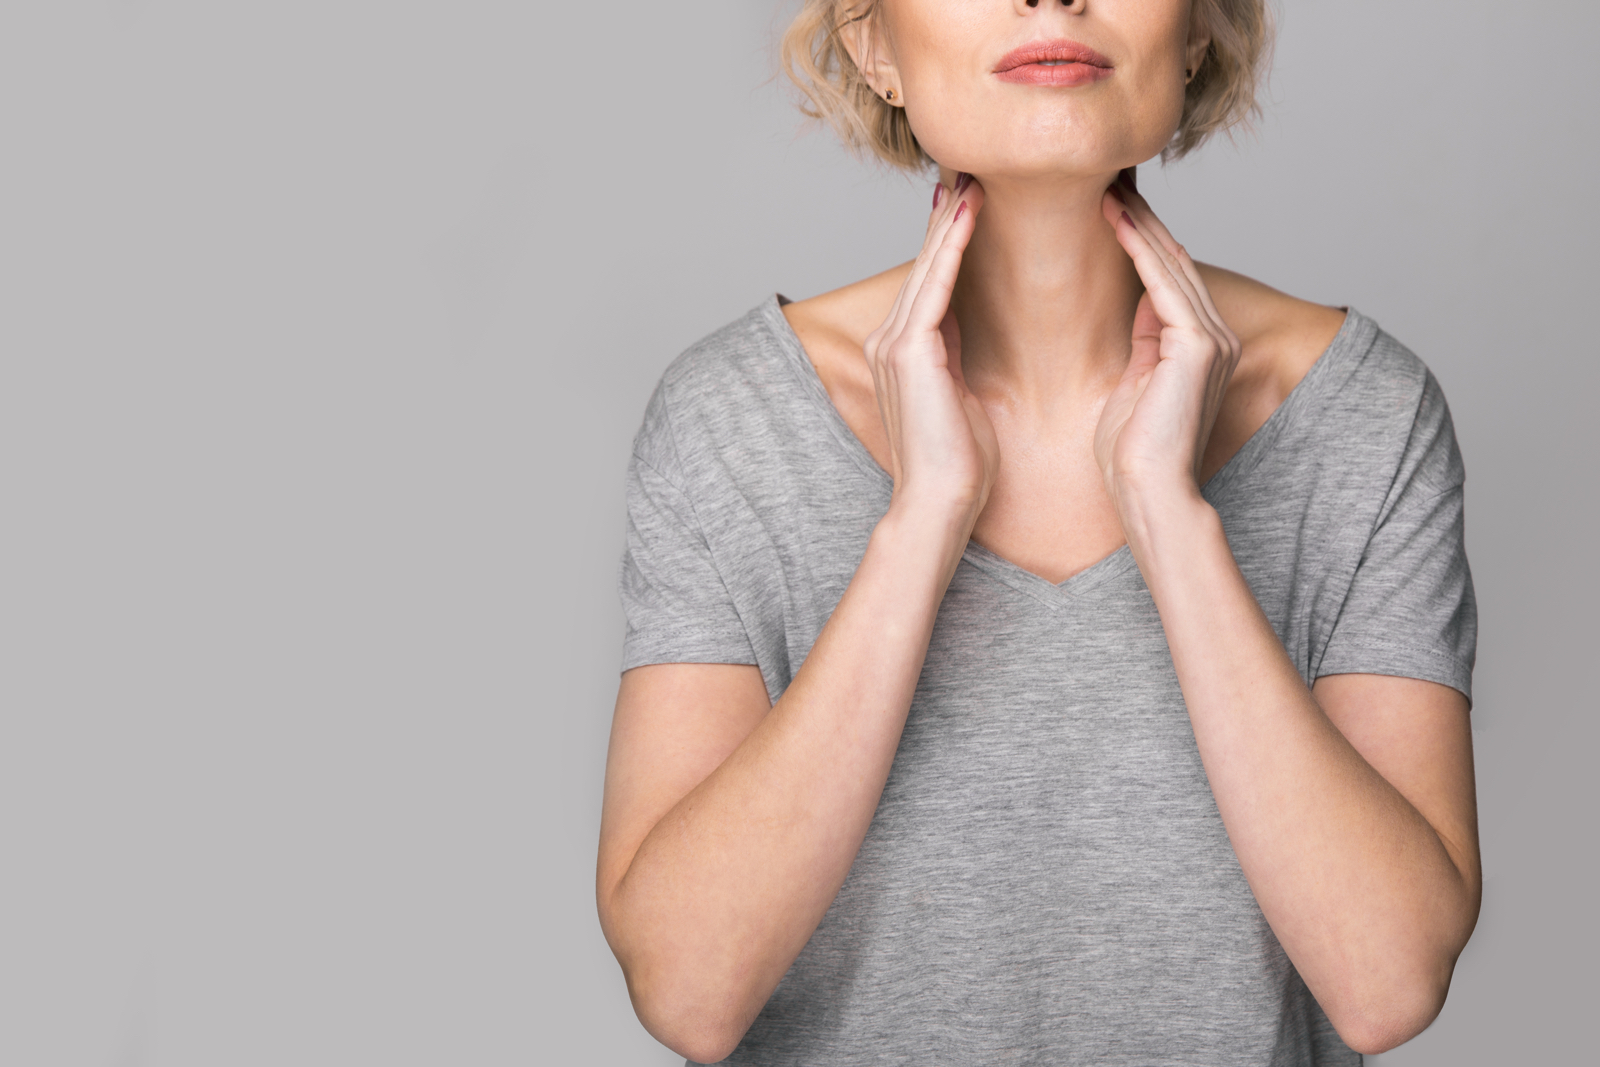 Hormone therapy is the preferred method for treating many thyroid conditions.